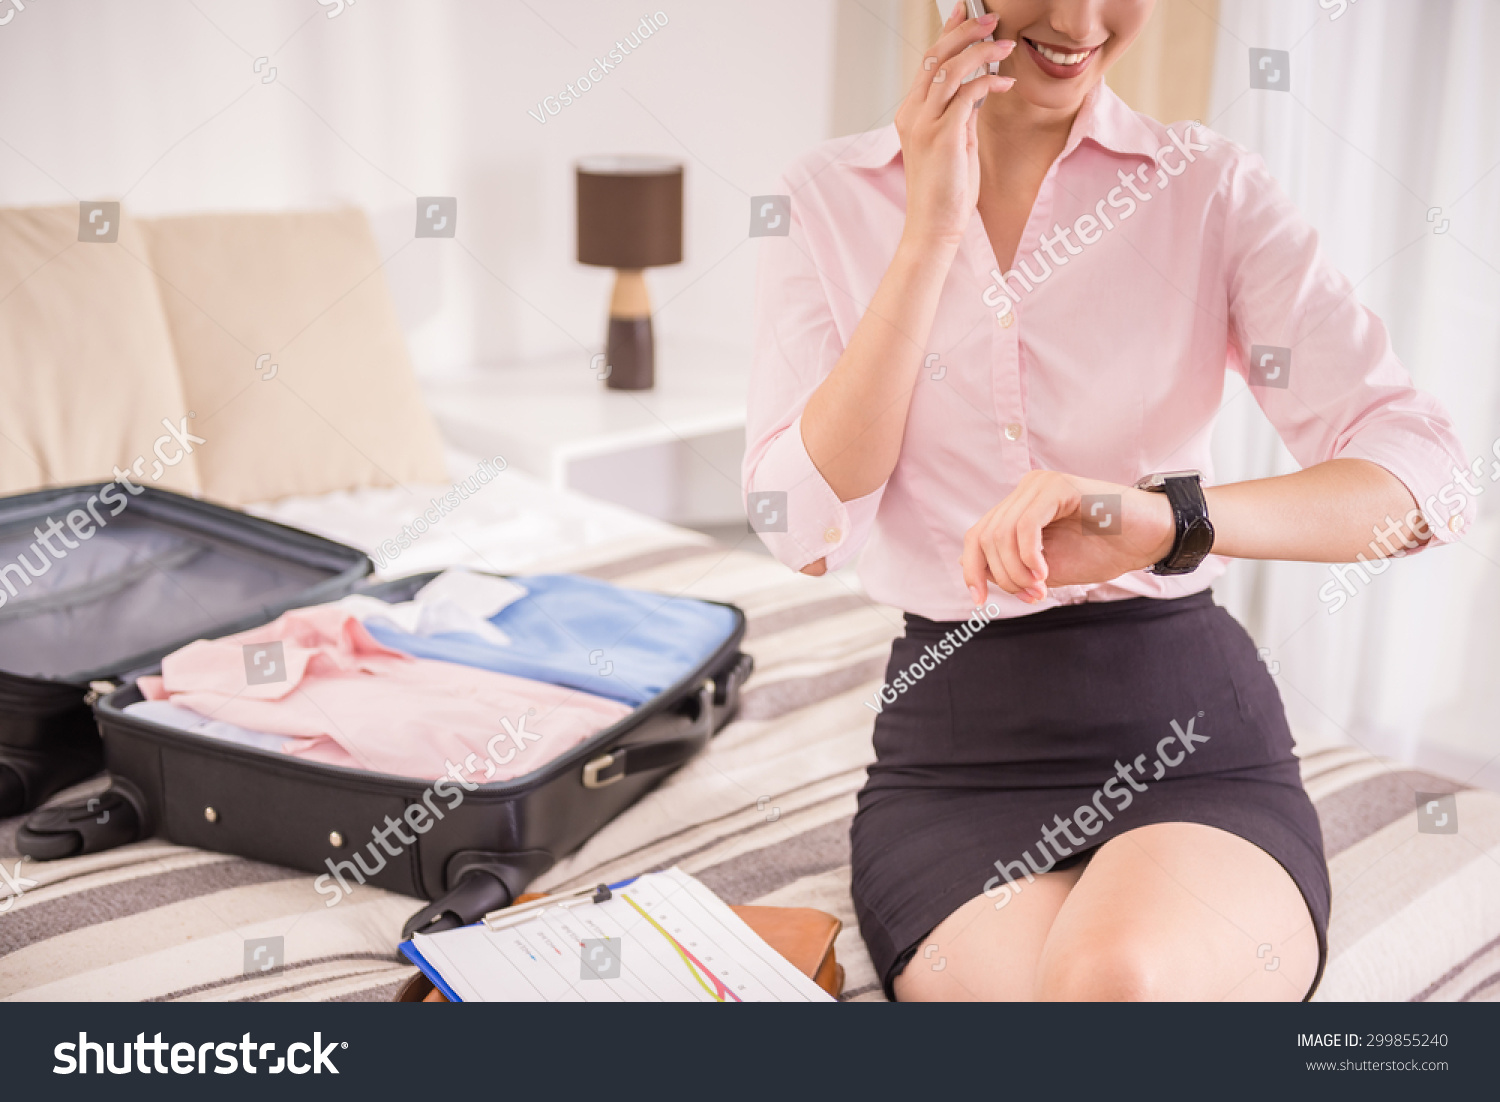 stock-photo-young-business-lady-hurring-up-to-meeting-and-talking-by-phone-close-up-299855240